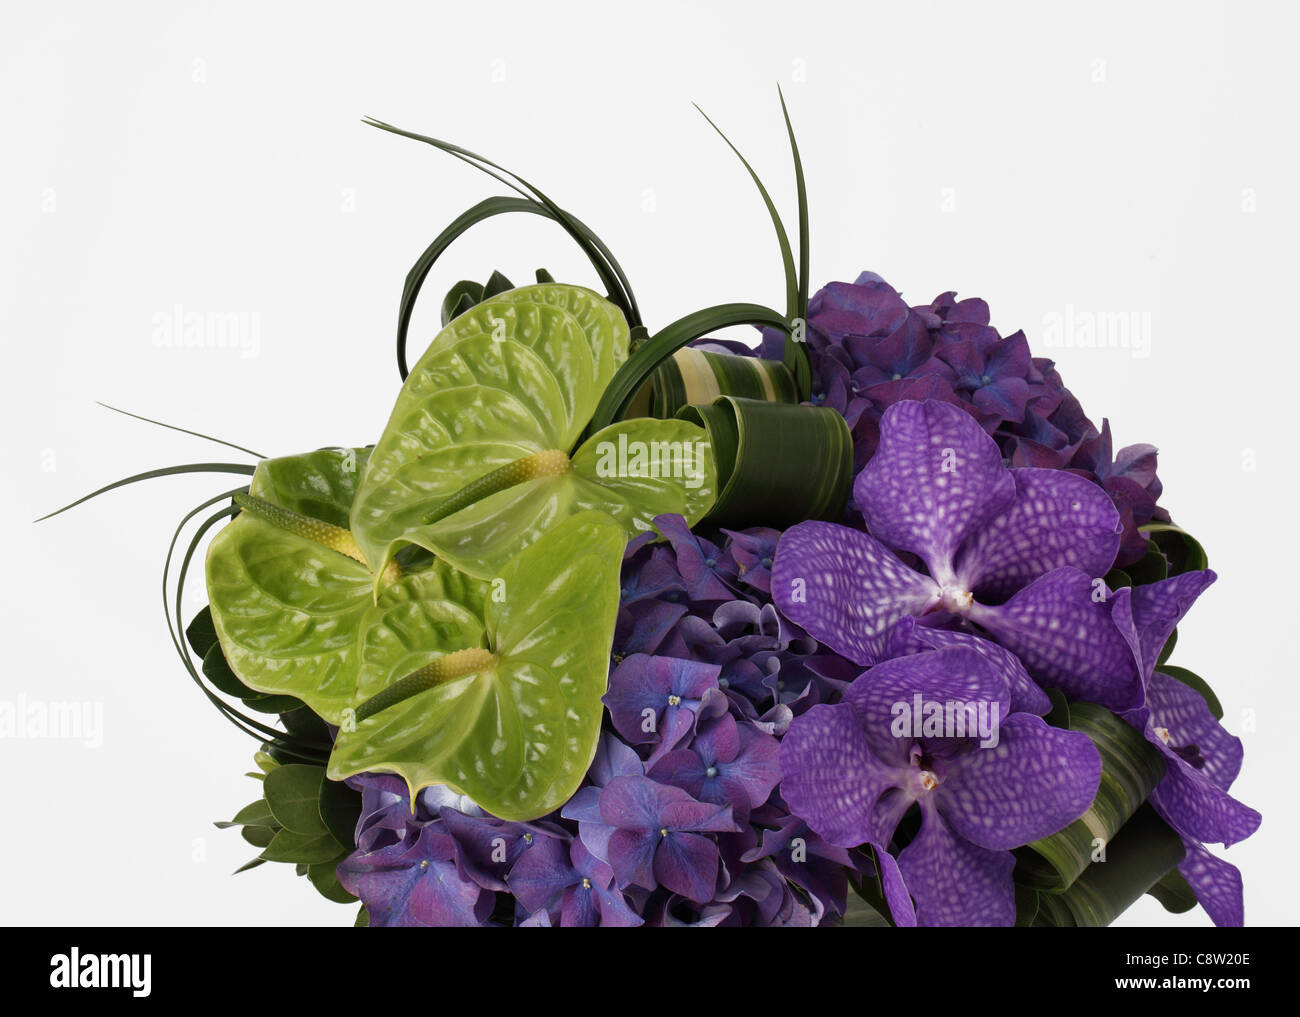 A close-up of a colorful bouquet of flowers. Purple vanda orchids, green anthuriums, purple hydrangea. Stock Photo